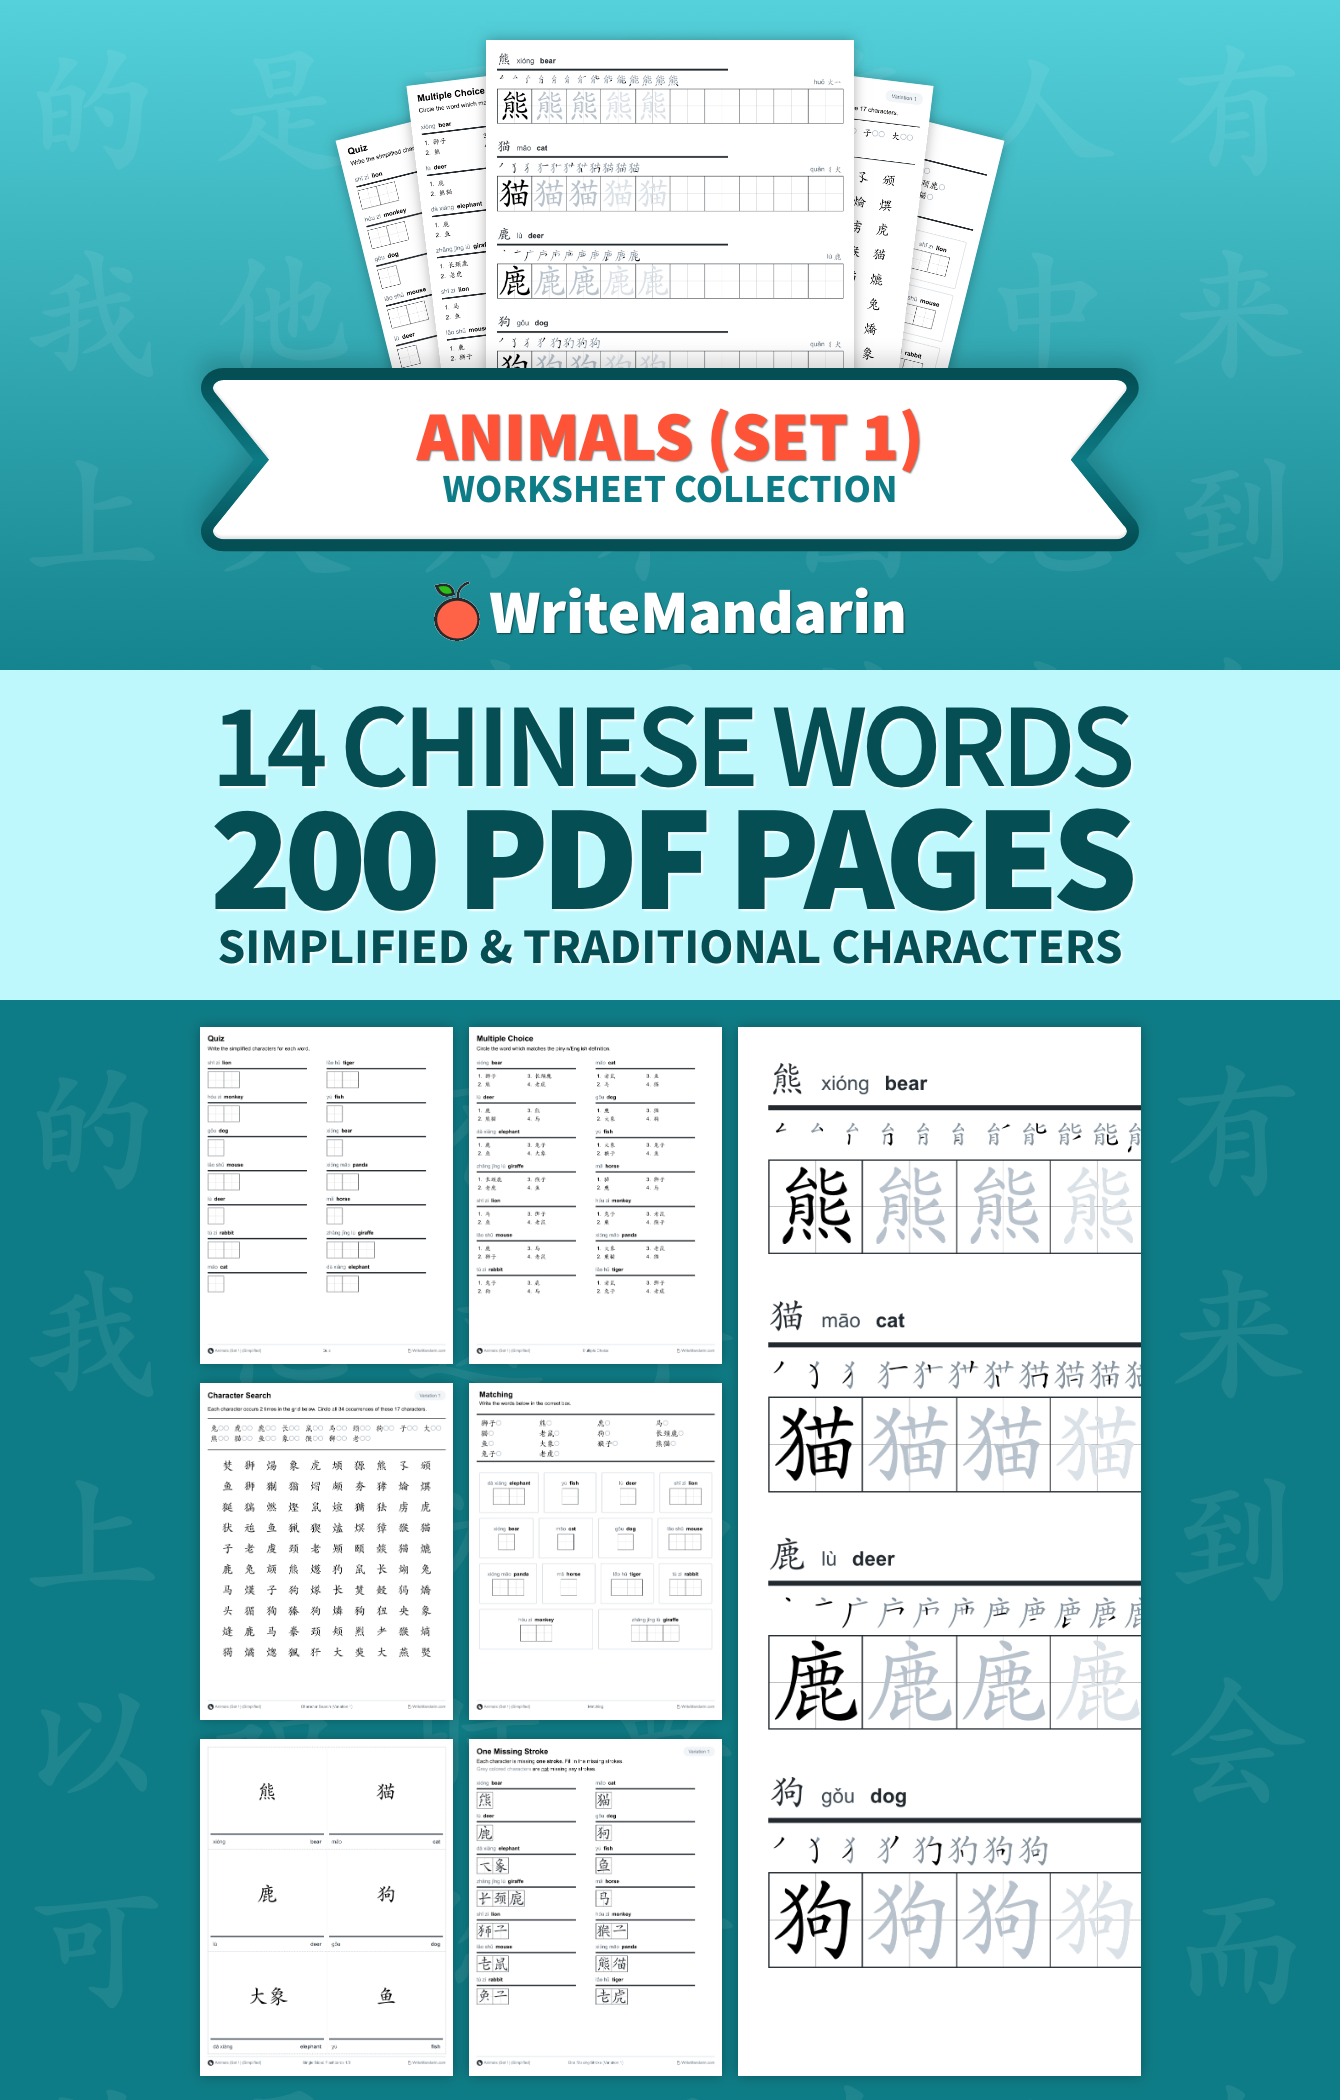 Preview image of Animals (Set 1) worksheet collection